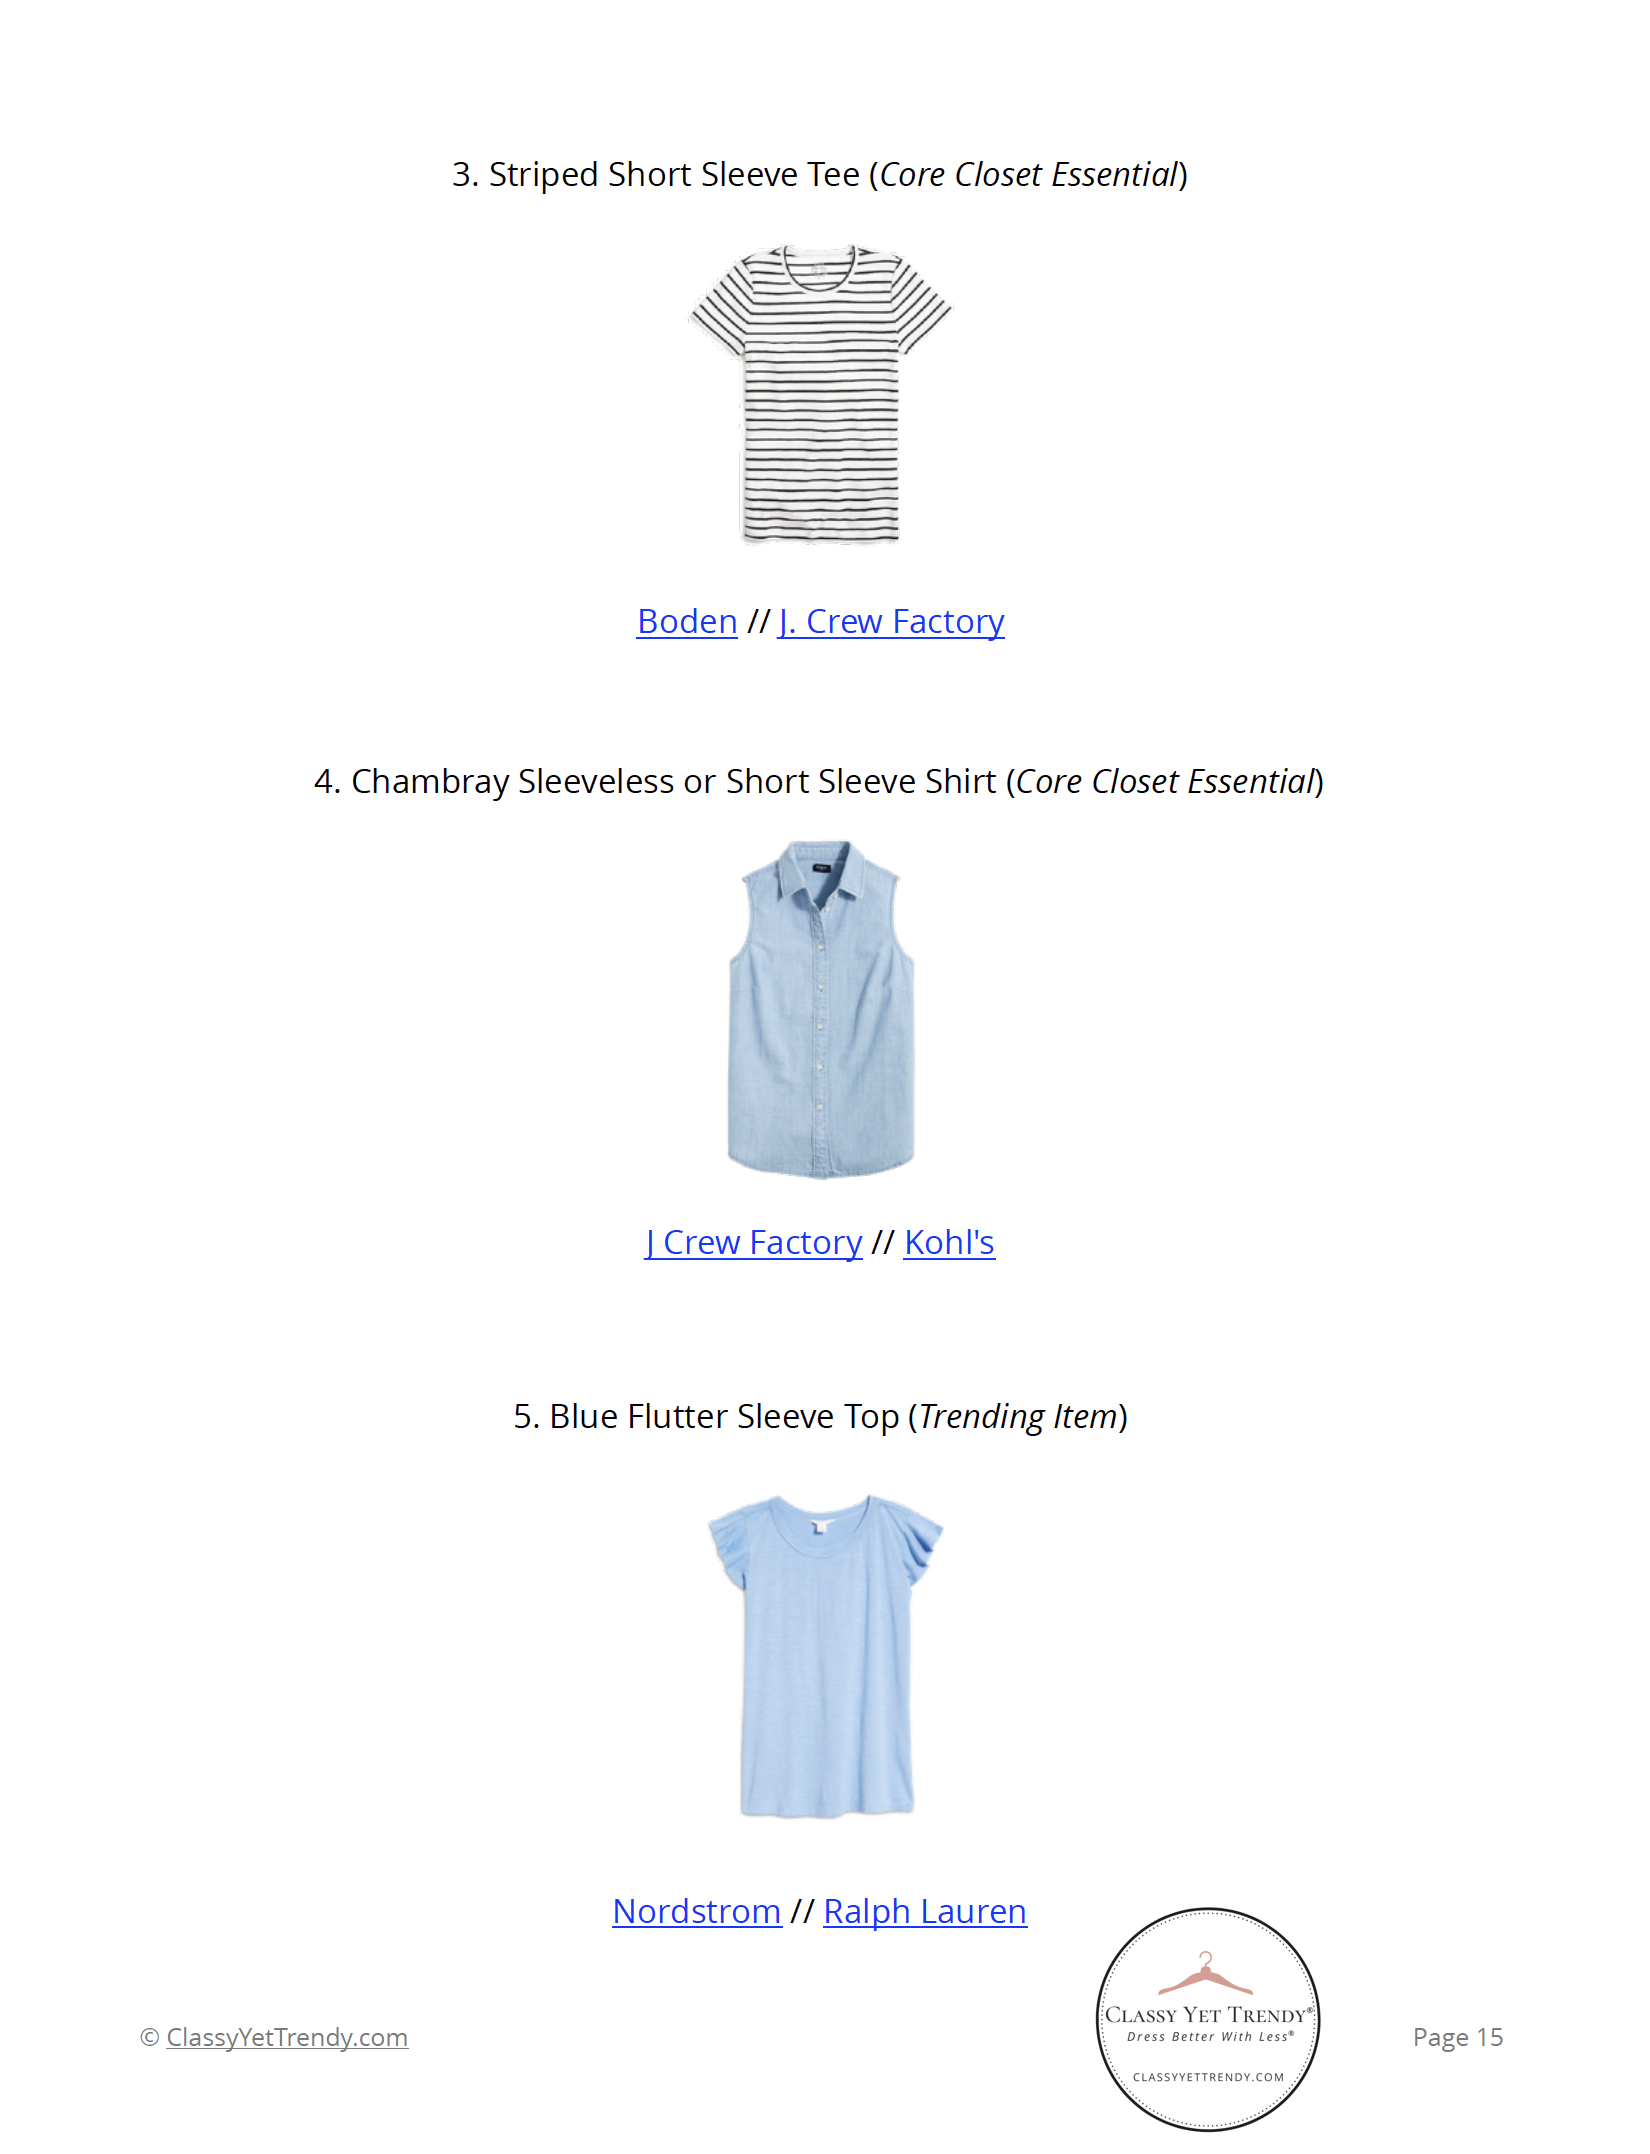 https://classyyettrendy.com/wp-content/uploads/2021/05/Stay-At-Home-Mom-Capsule-Wardrobe-Summer-2021-pg-15.png